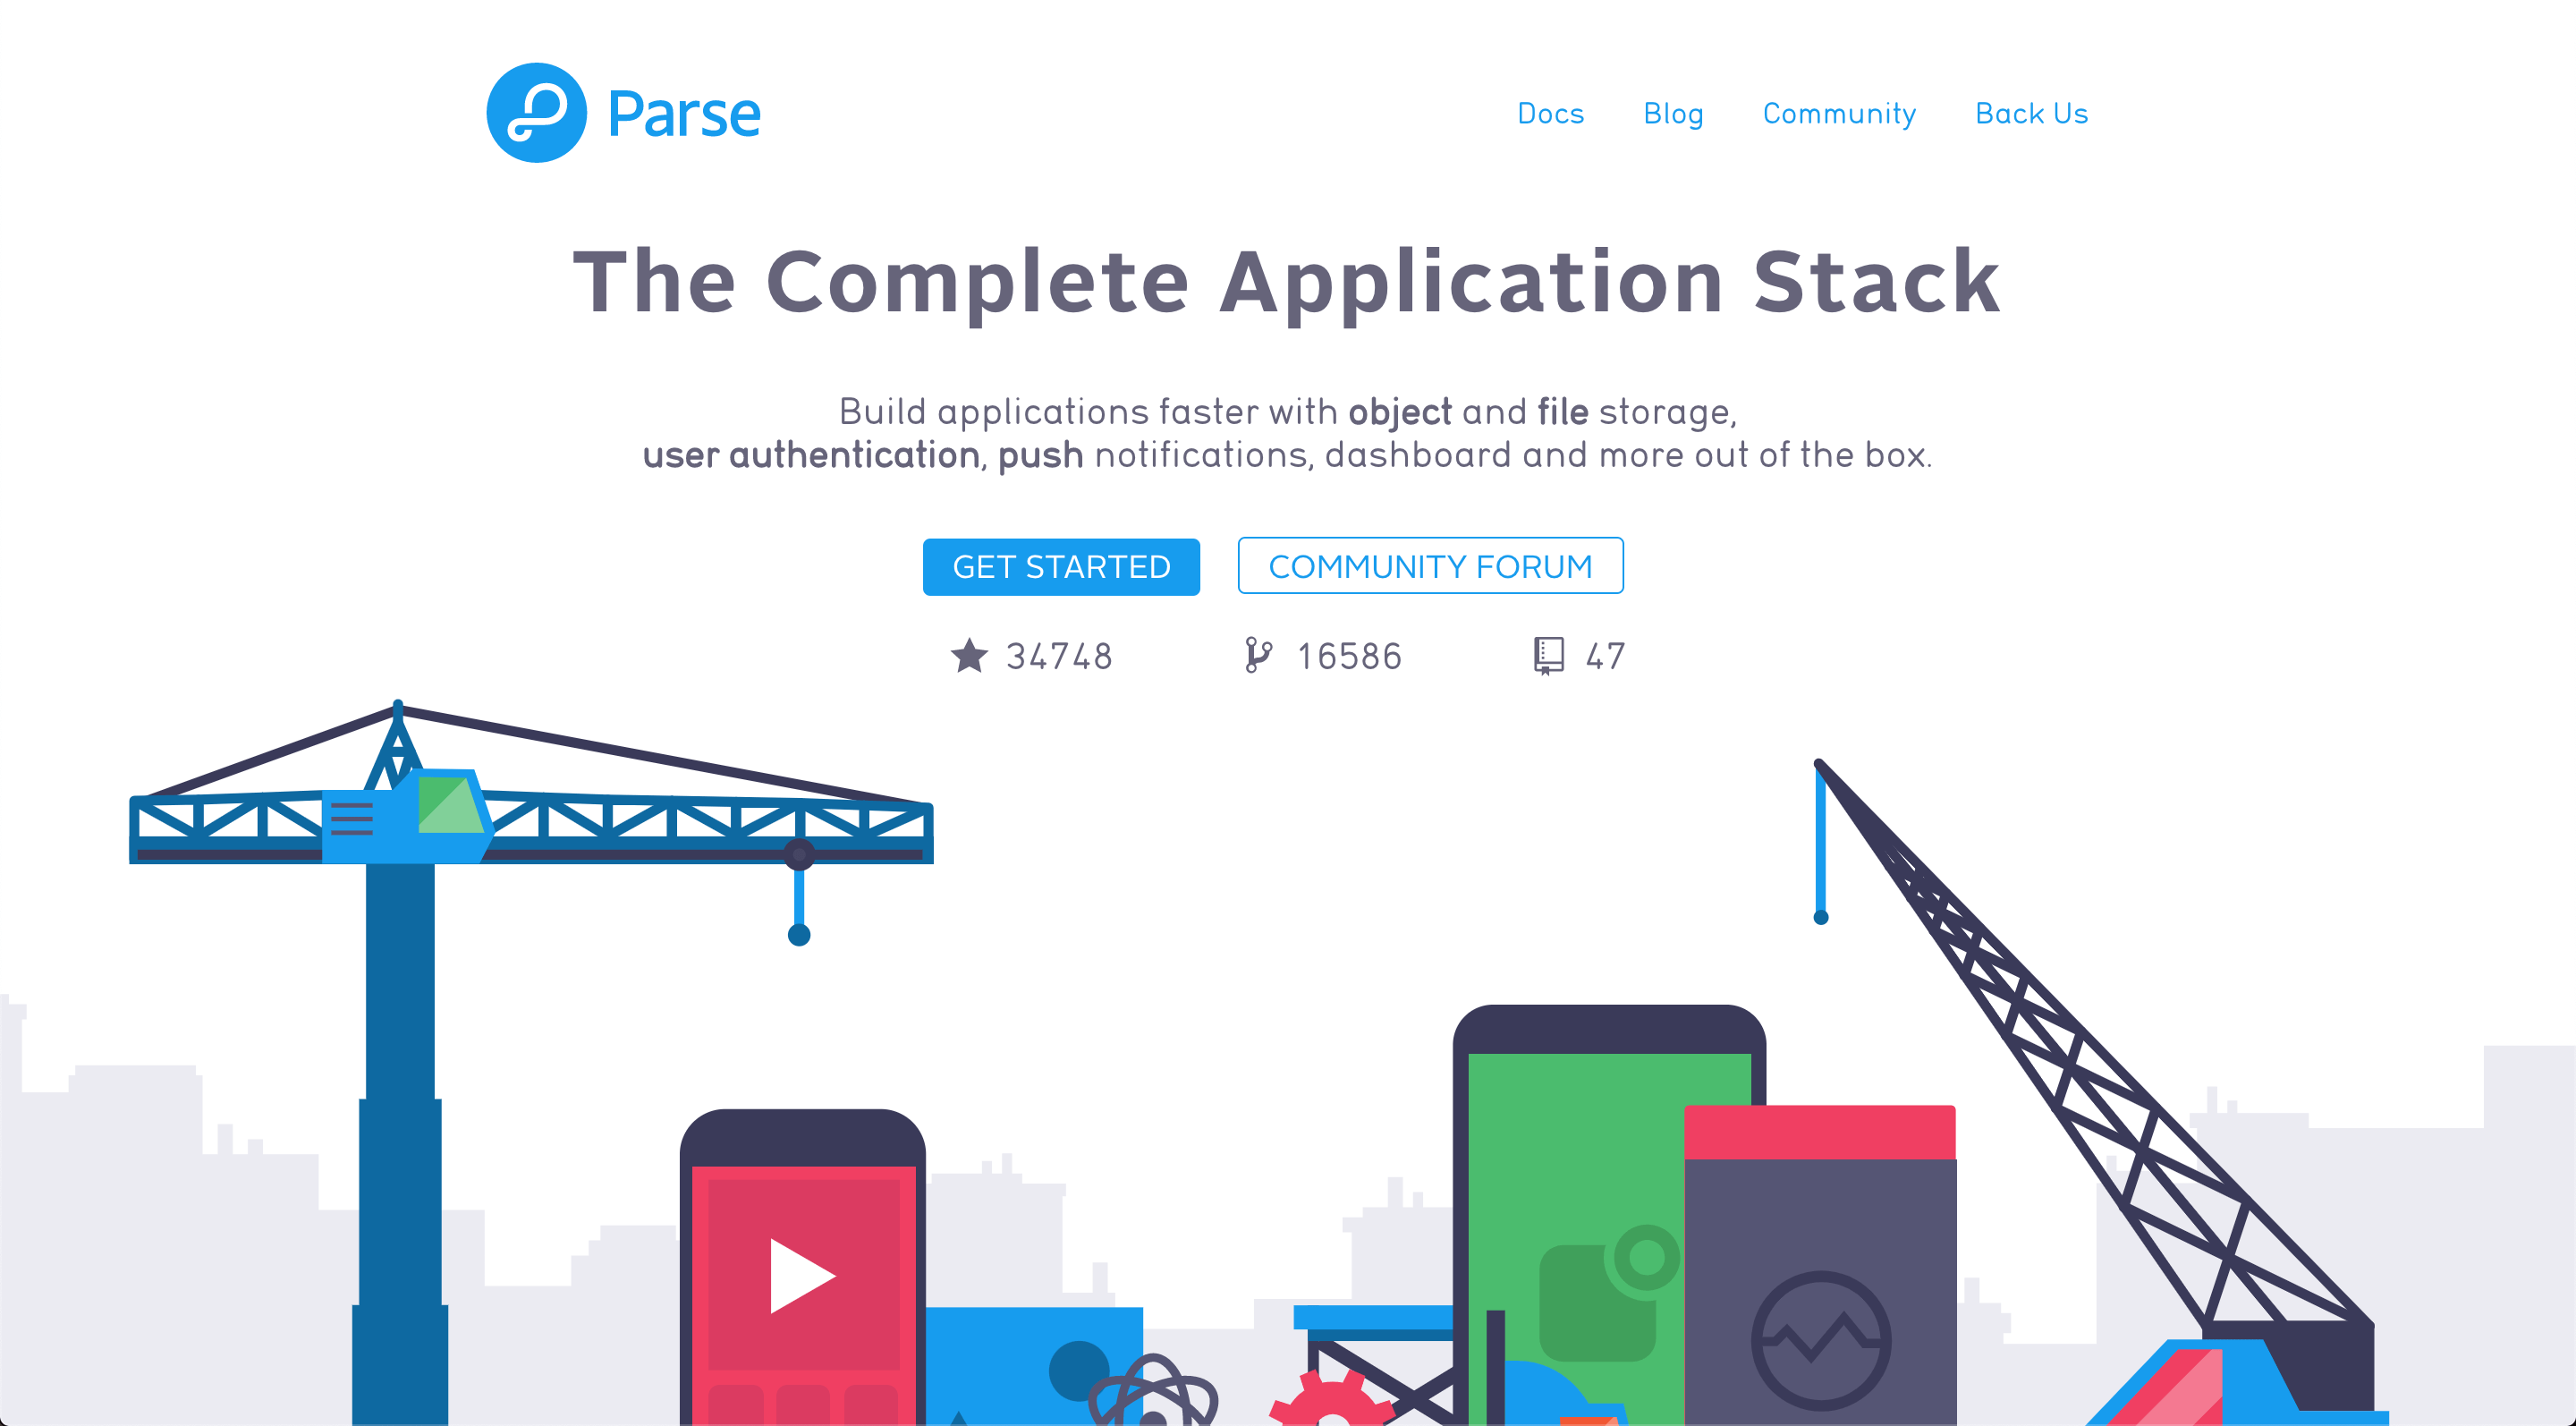 How to Deploy Parse Dashboard in China? (A Step-by-Step Guide)